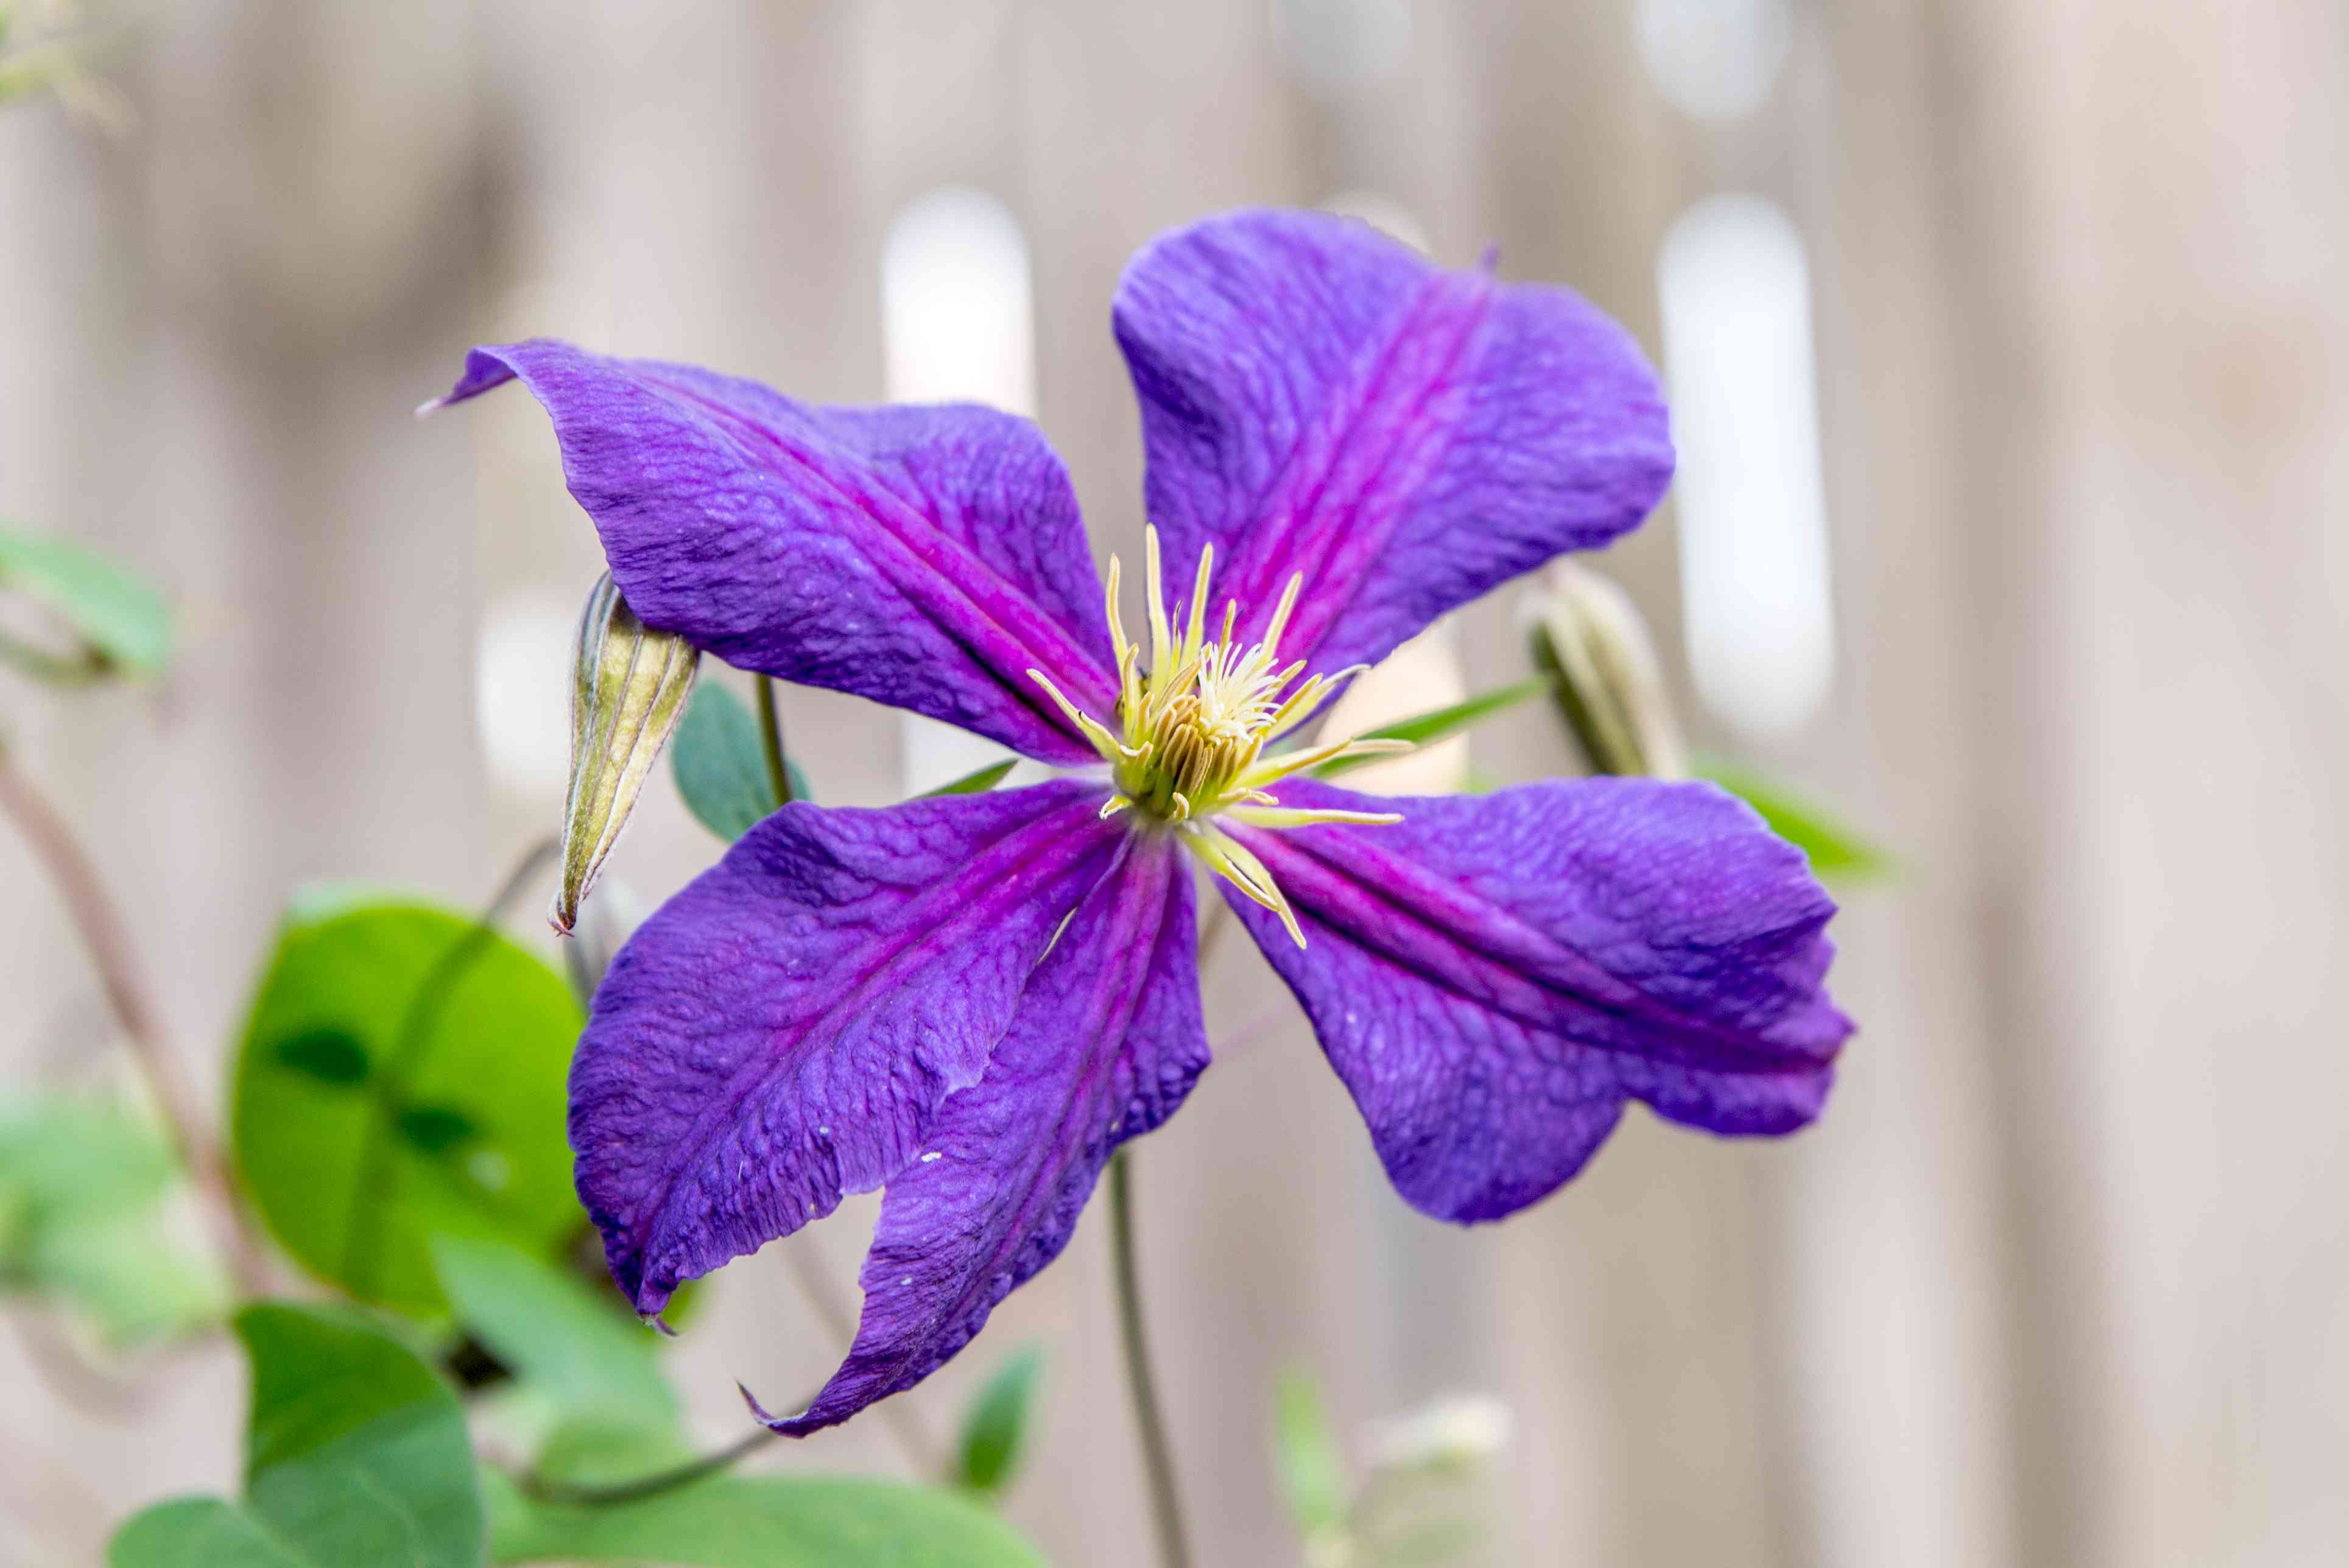 How To Plant Clematis